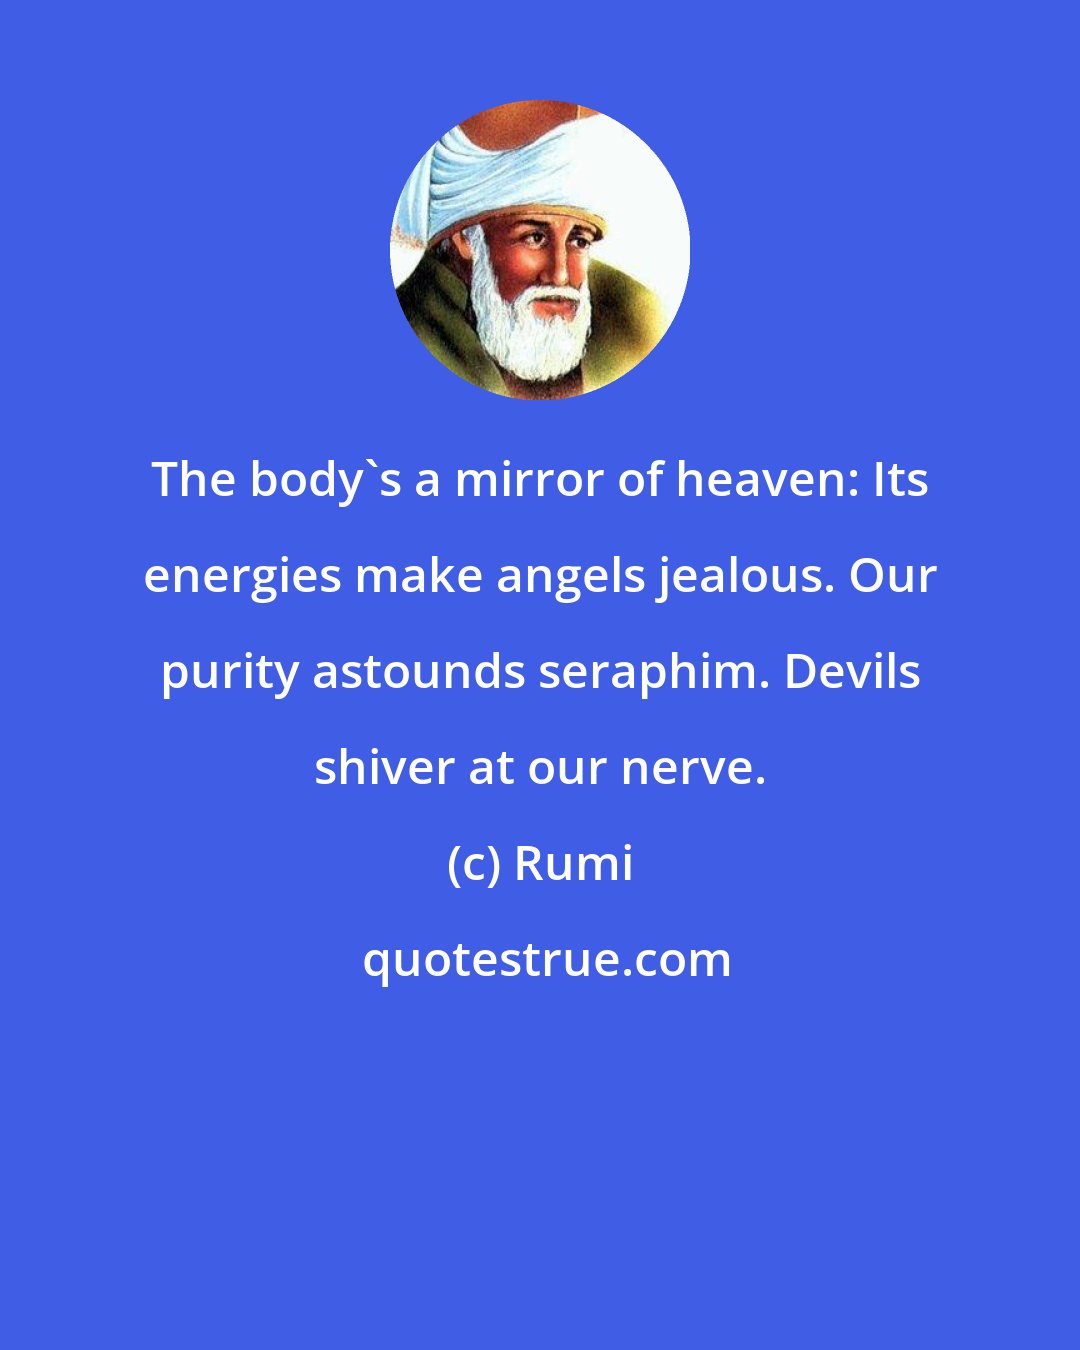 Rumi: The body's a mirror of heaven: Its energies make angels jealous. Our purity astounds seraphim. Devils shiver at our nerve.